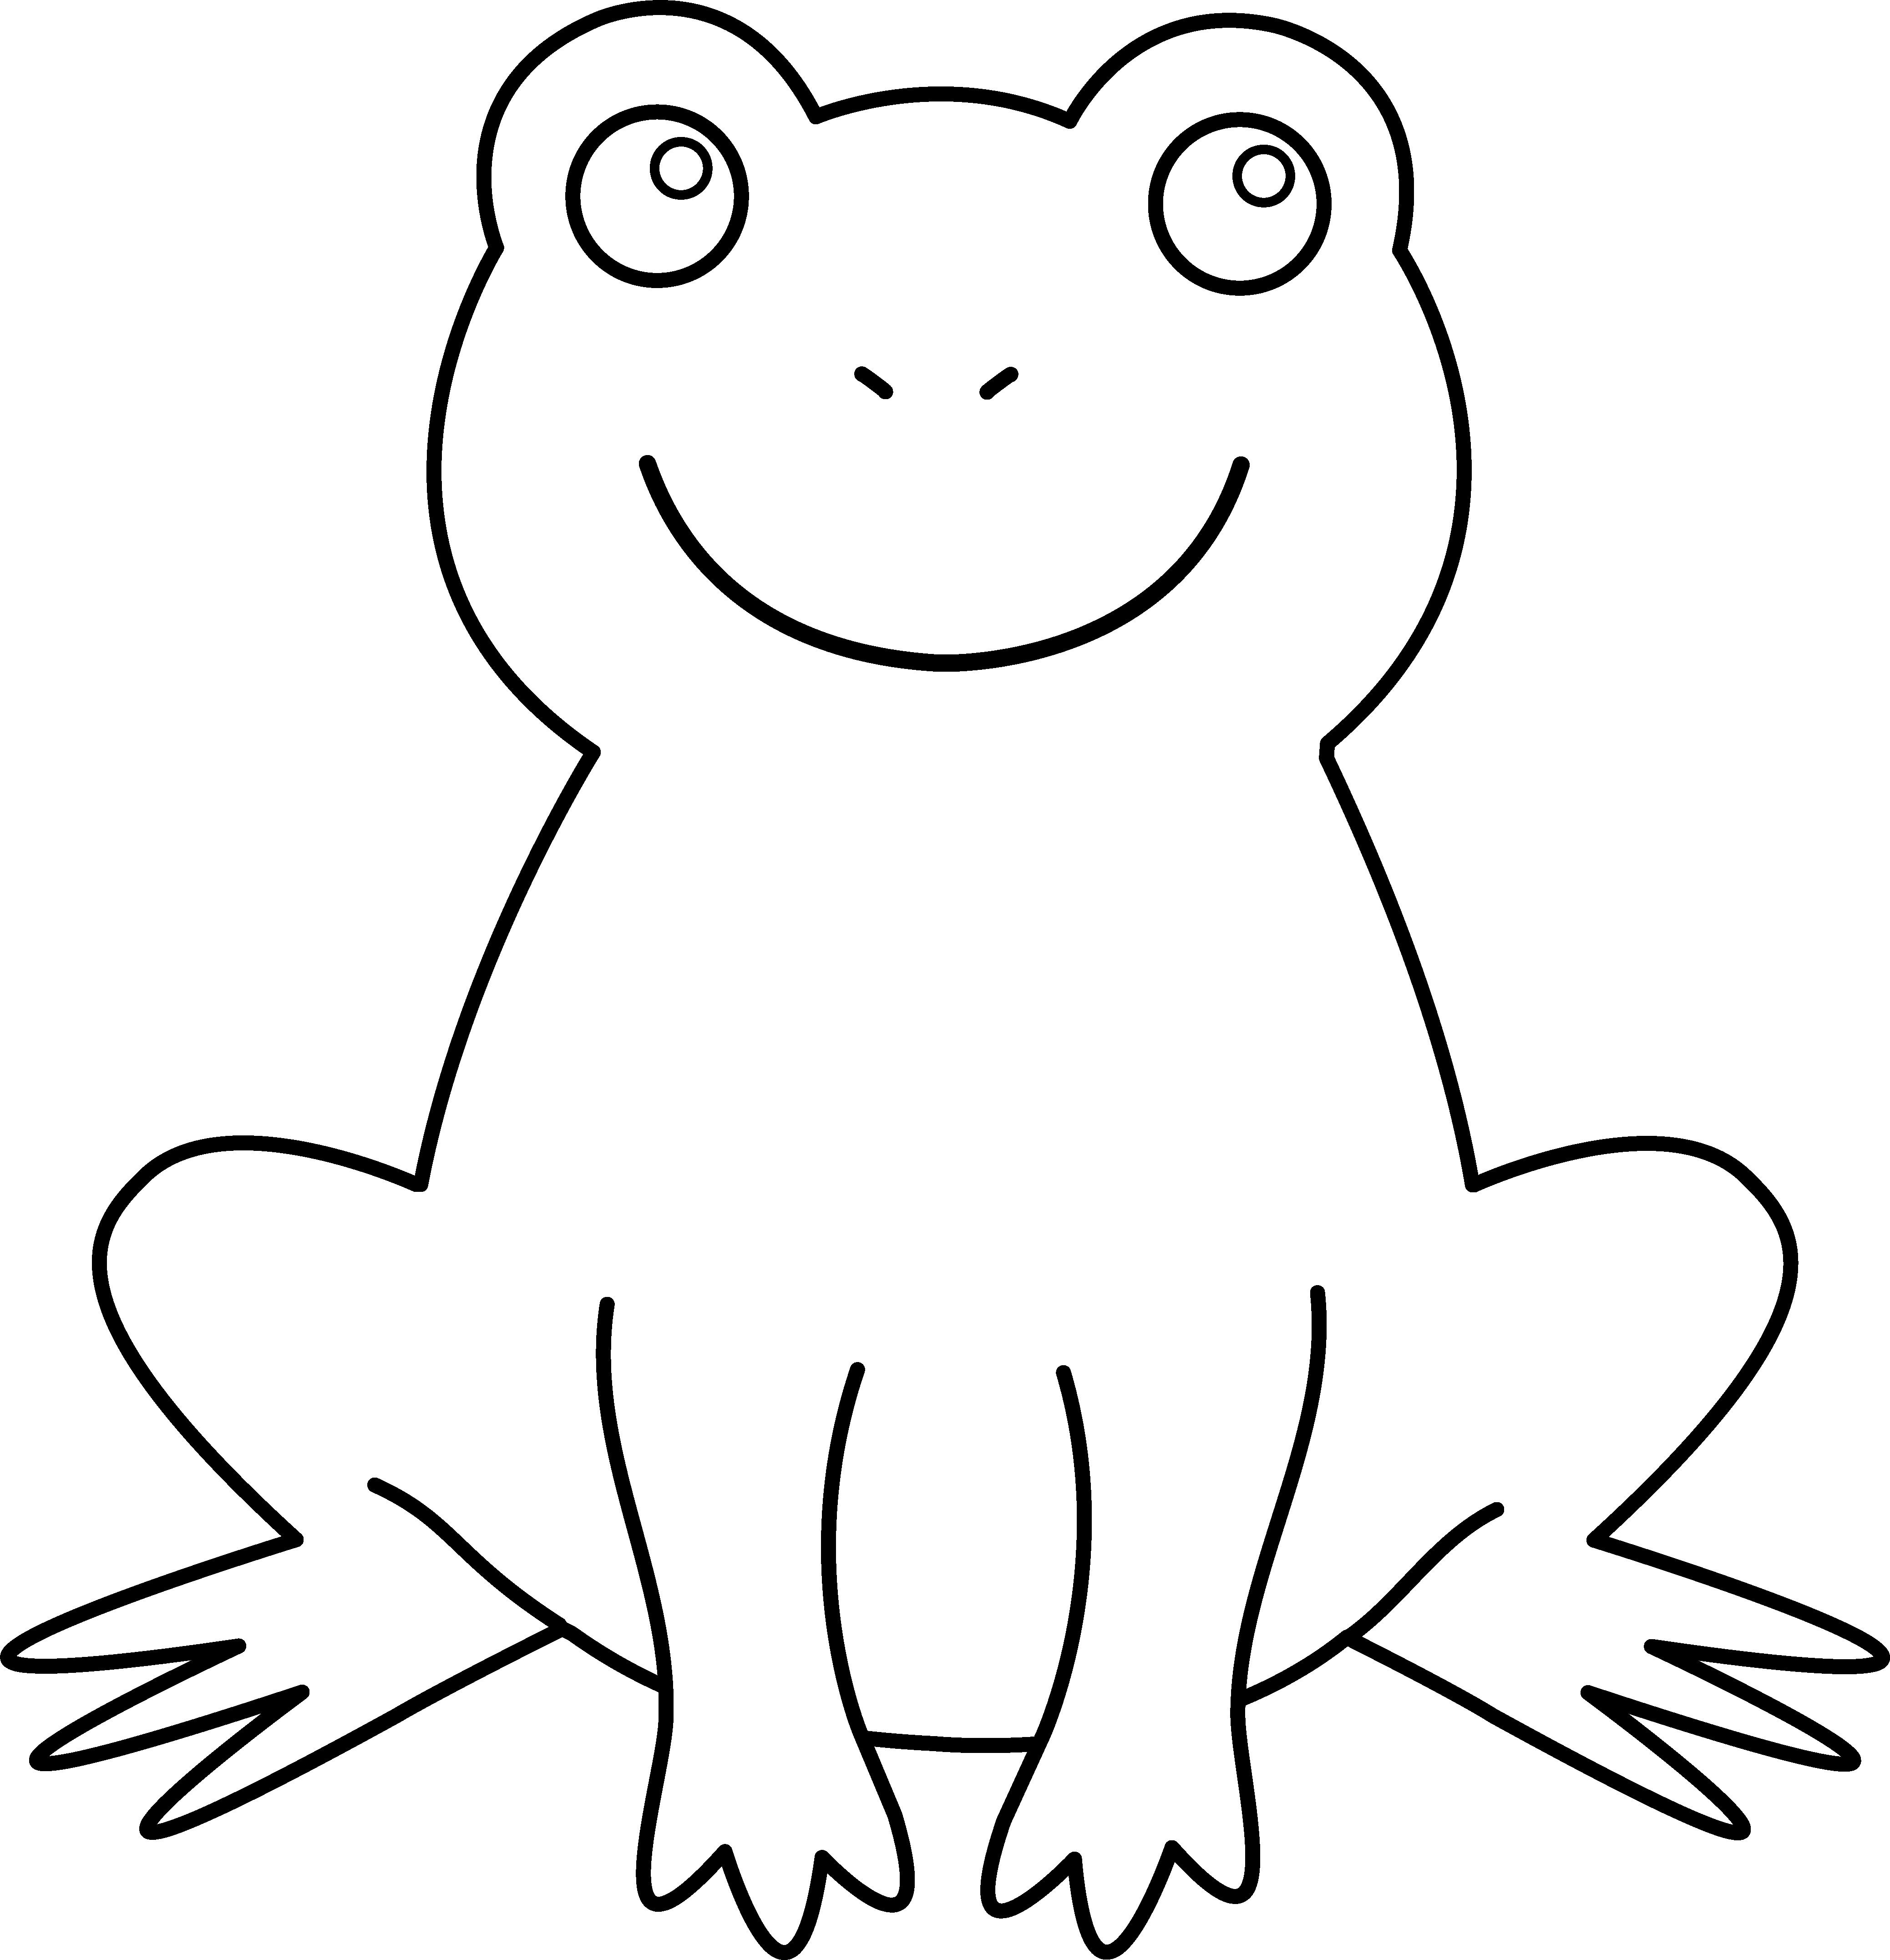 Black and White Frog Eating a